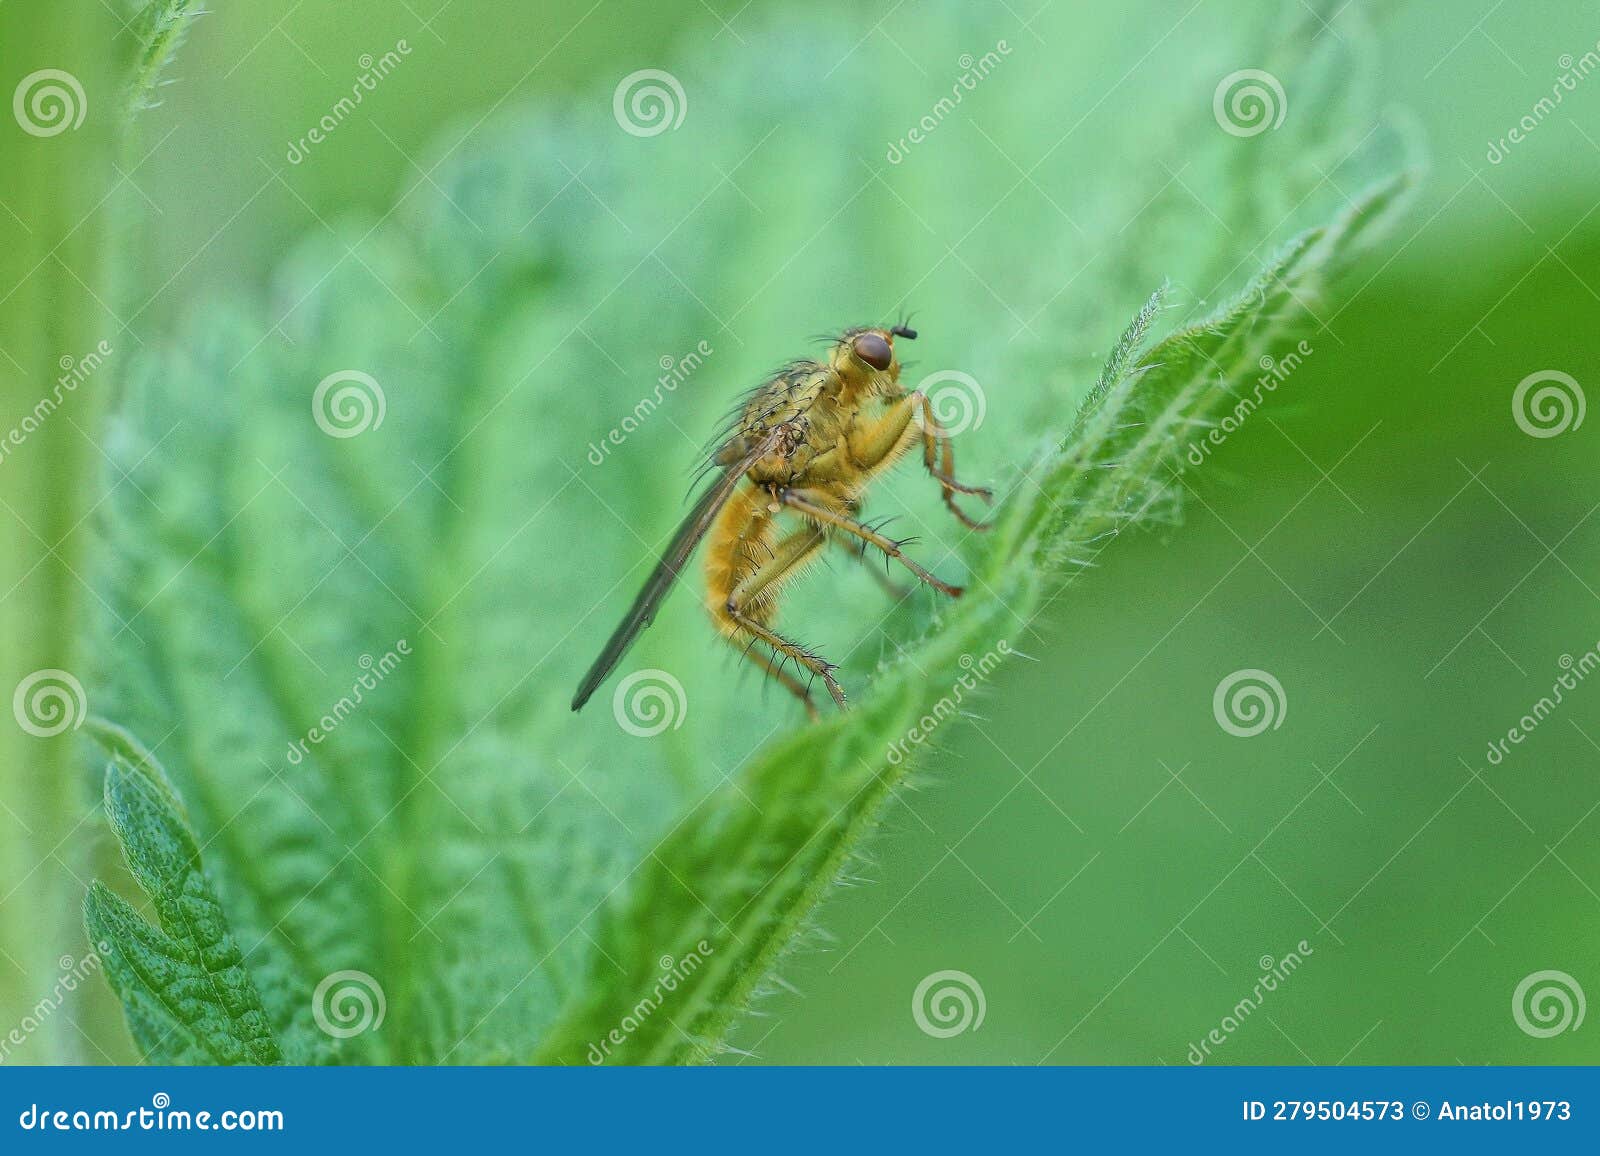 One Brown Fly Sits on a Green Leaf of a Plant Stock Image - Image of ...